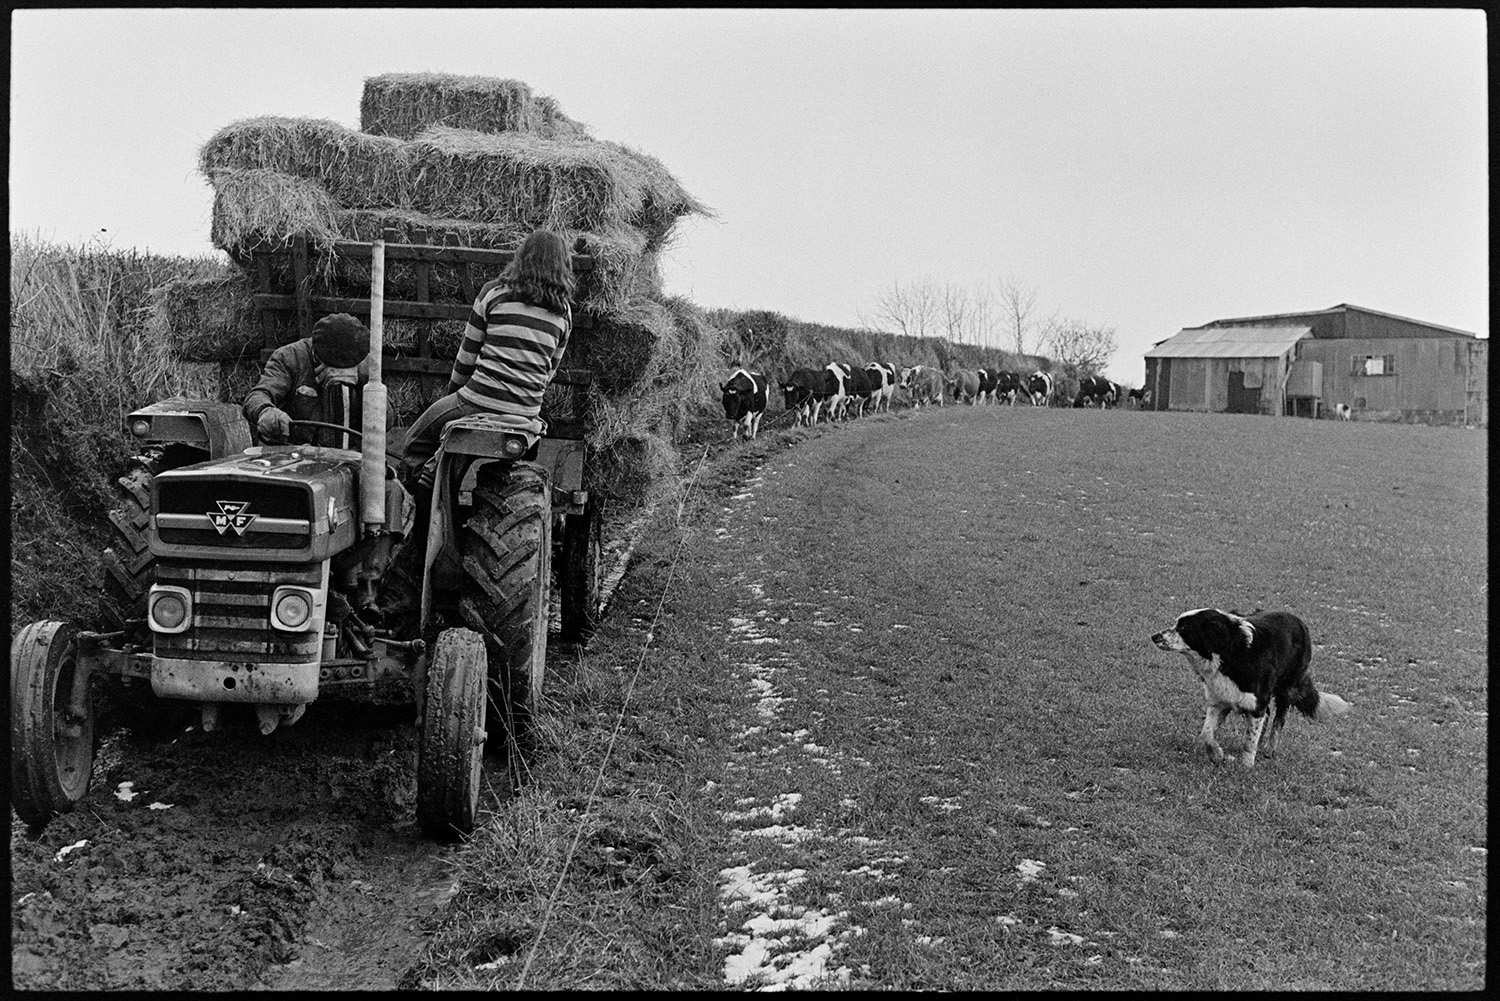 Farmer and daughter taking hay back to farm with tractor and trailer. 
[Ivor Bourne and his daughter, Marylin Bourne, driving a tractor and trailer with hay bales along the edge of a field back to the farmyard at Jeffrys, Beaford, also known as Mill Road Farm. A dog and herd of cattle are following them and corrugated iron barns are visible in the background. Patches of snow can also be seen in the field.]